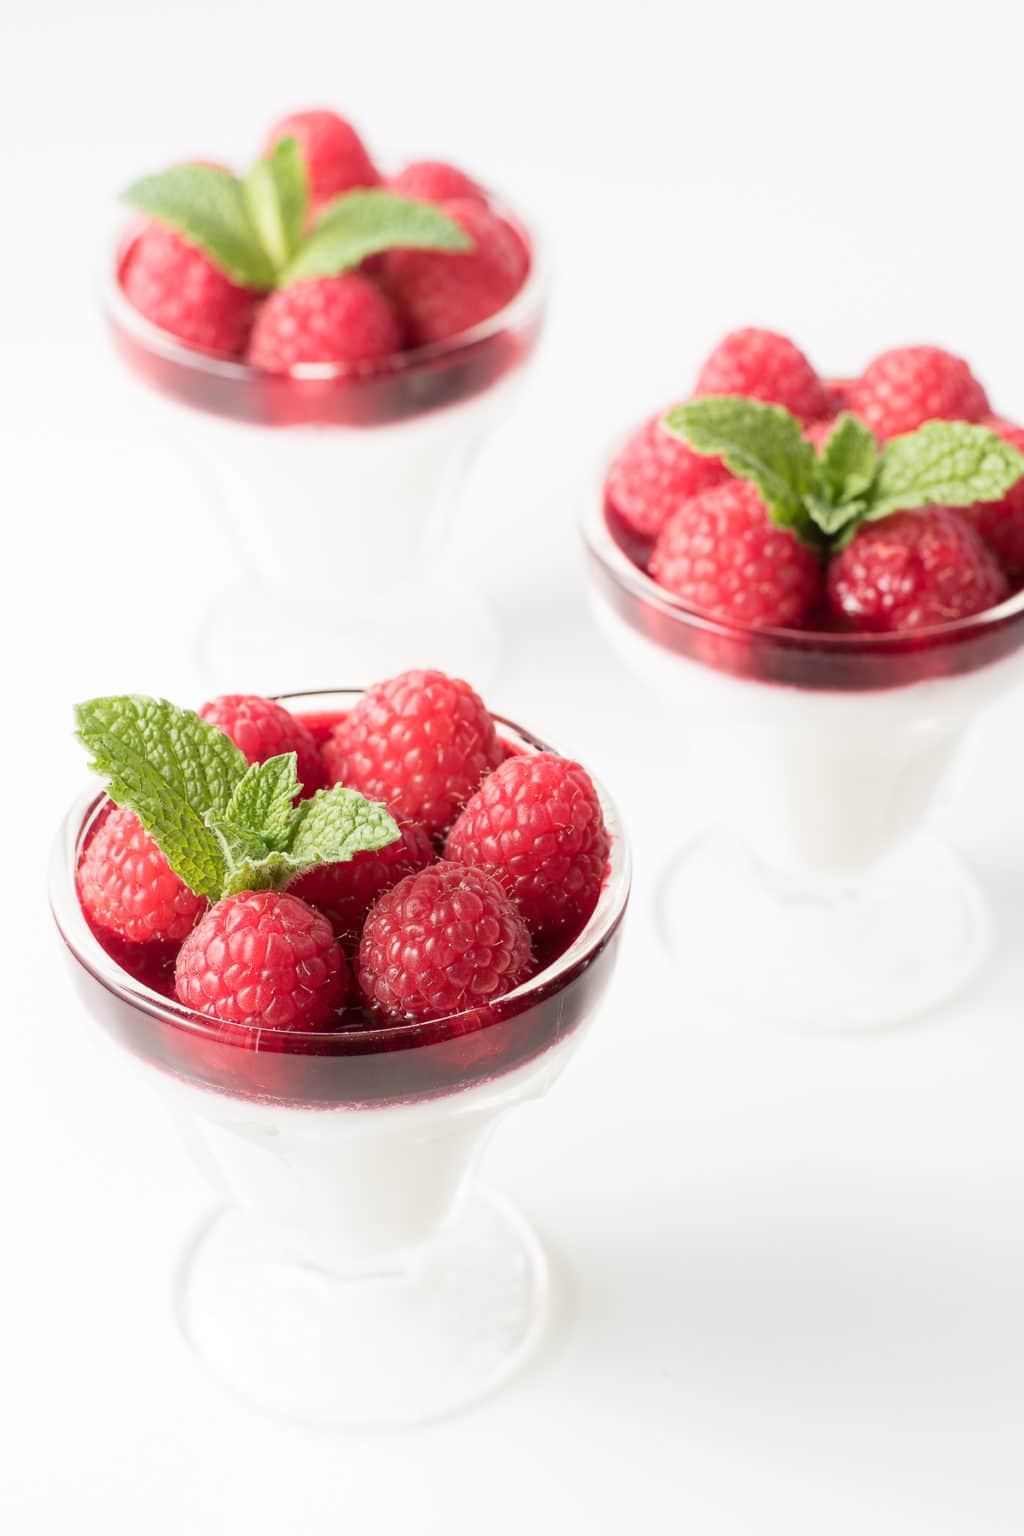 Three parfait glasses filled with Panna Cotta and topped with fresh raspberries and mint sprigs.